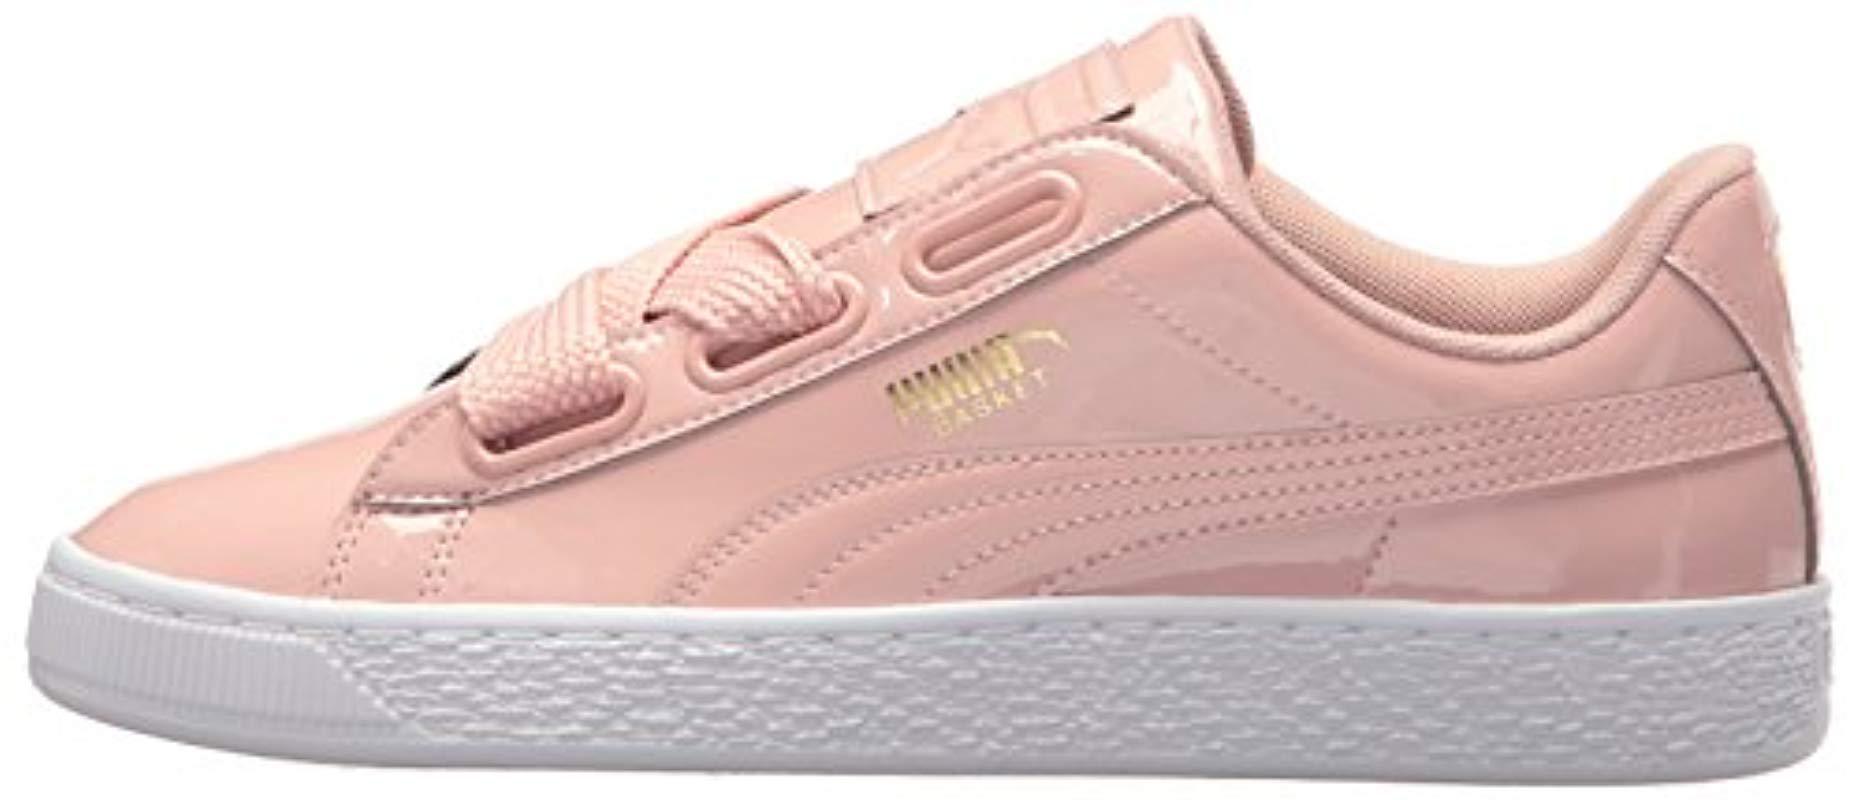 PUMA Basket Heart Patent Wn's Trainers - Lyst